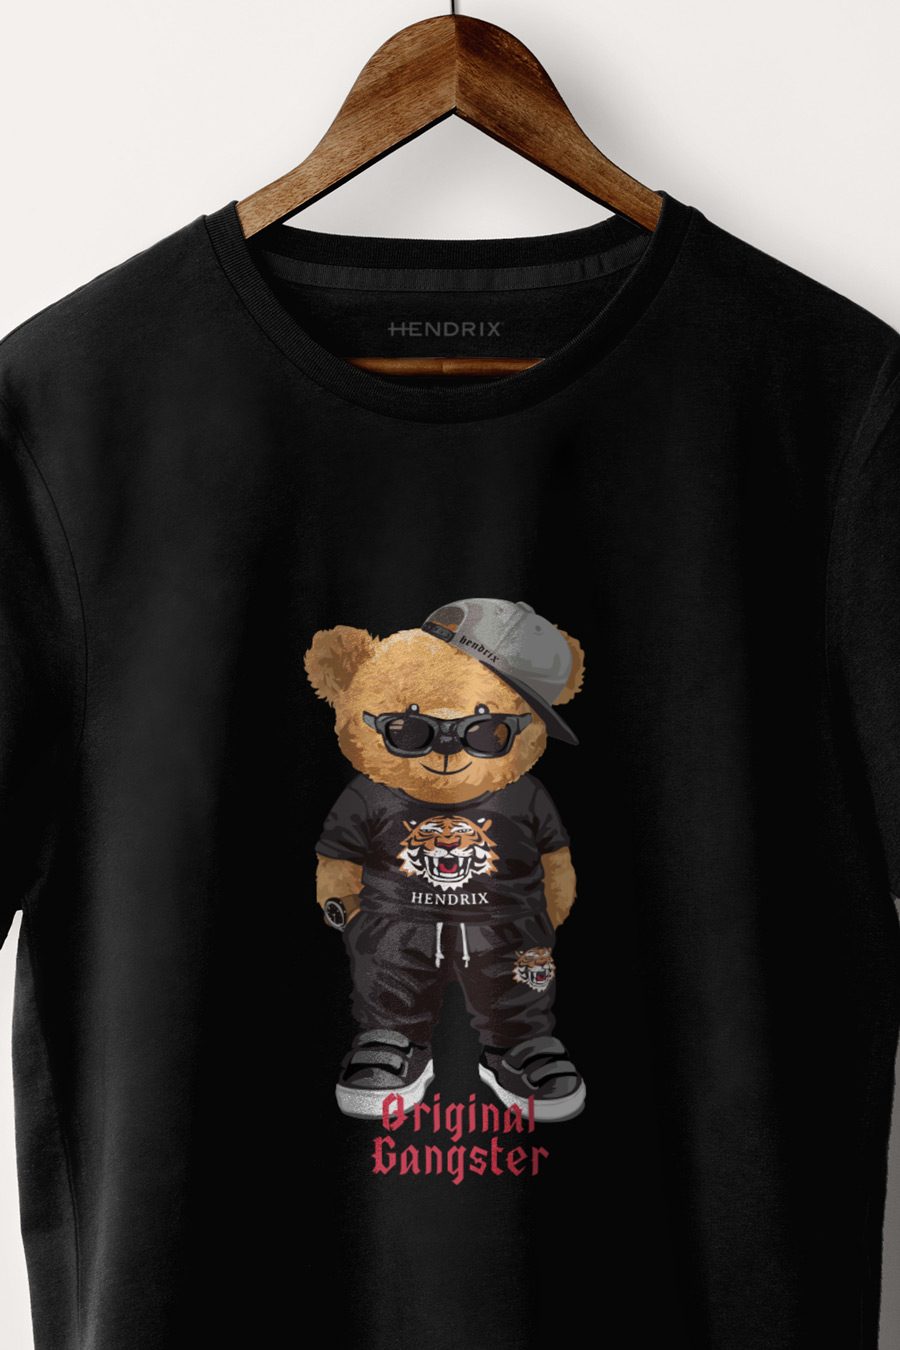 T-shirt in Black Color with Original Gangster Teddy Print – Hedrix